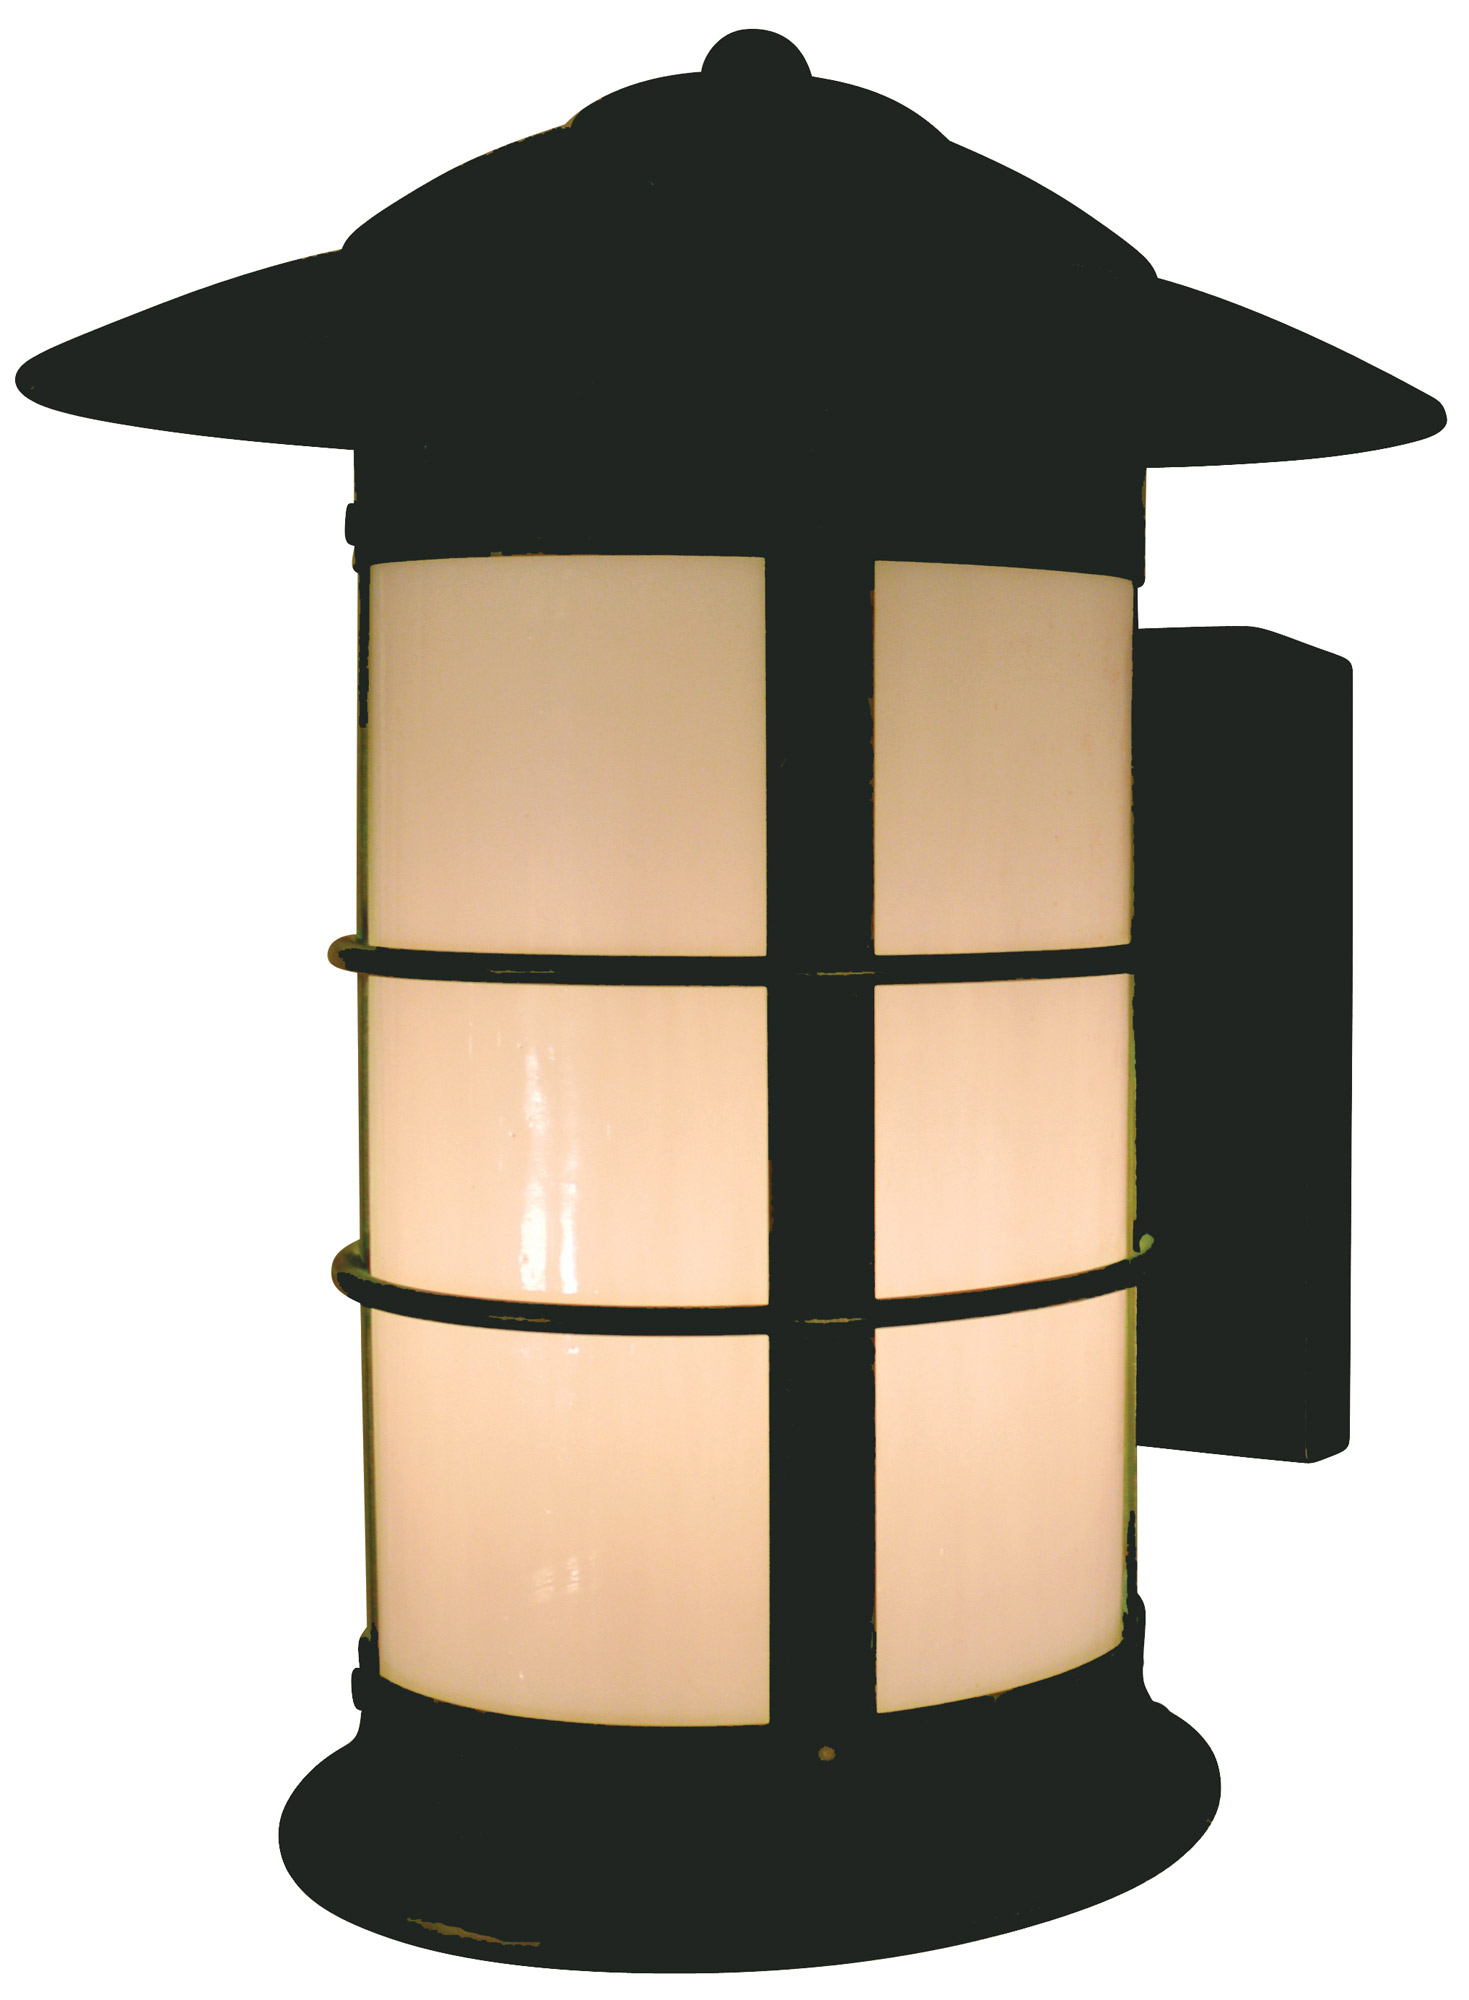 Newport Long Outdoor Wall Sconce by Arroyo Craftsman | NS-9LCS-BK |  ARR1070879